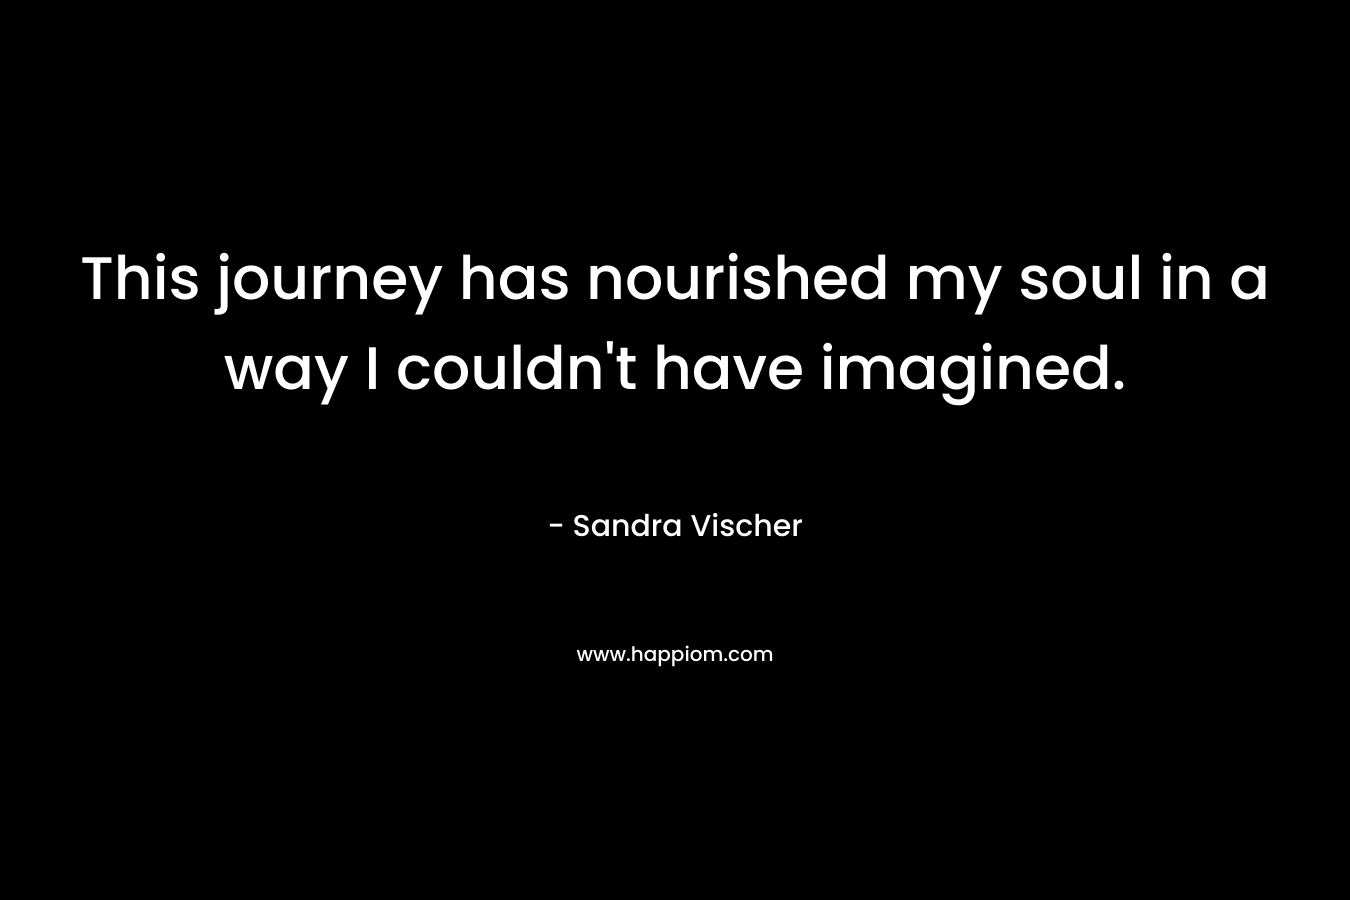 This journey has nourished my soul in a way I couldn’t have imagined. – Sandra Vischer